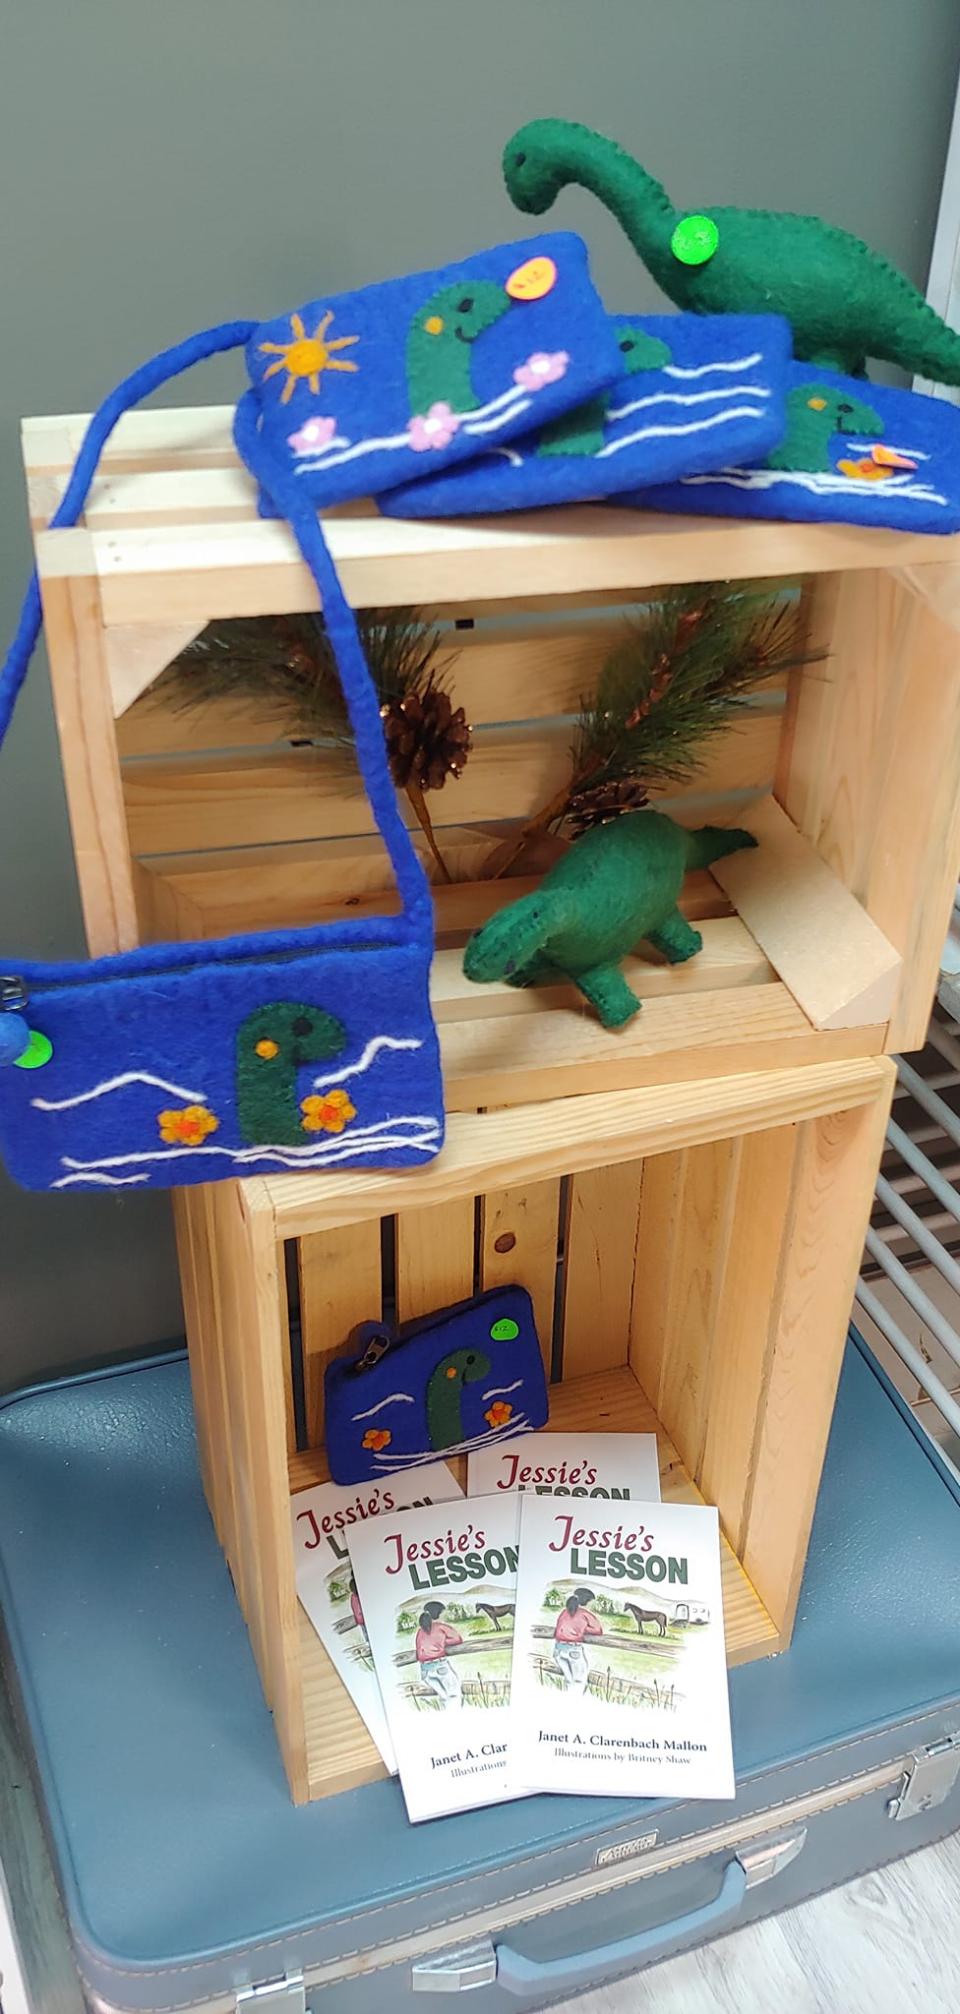 A shop display shows handcrafted stuffed animals of a green lake monster, as well as a purse and wallets.